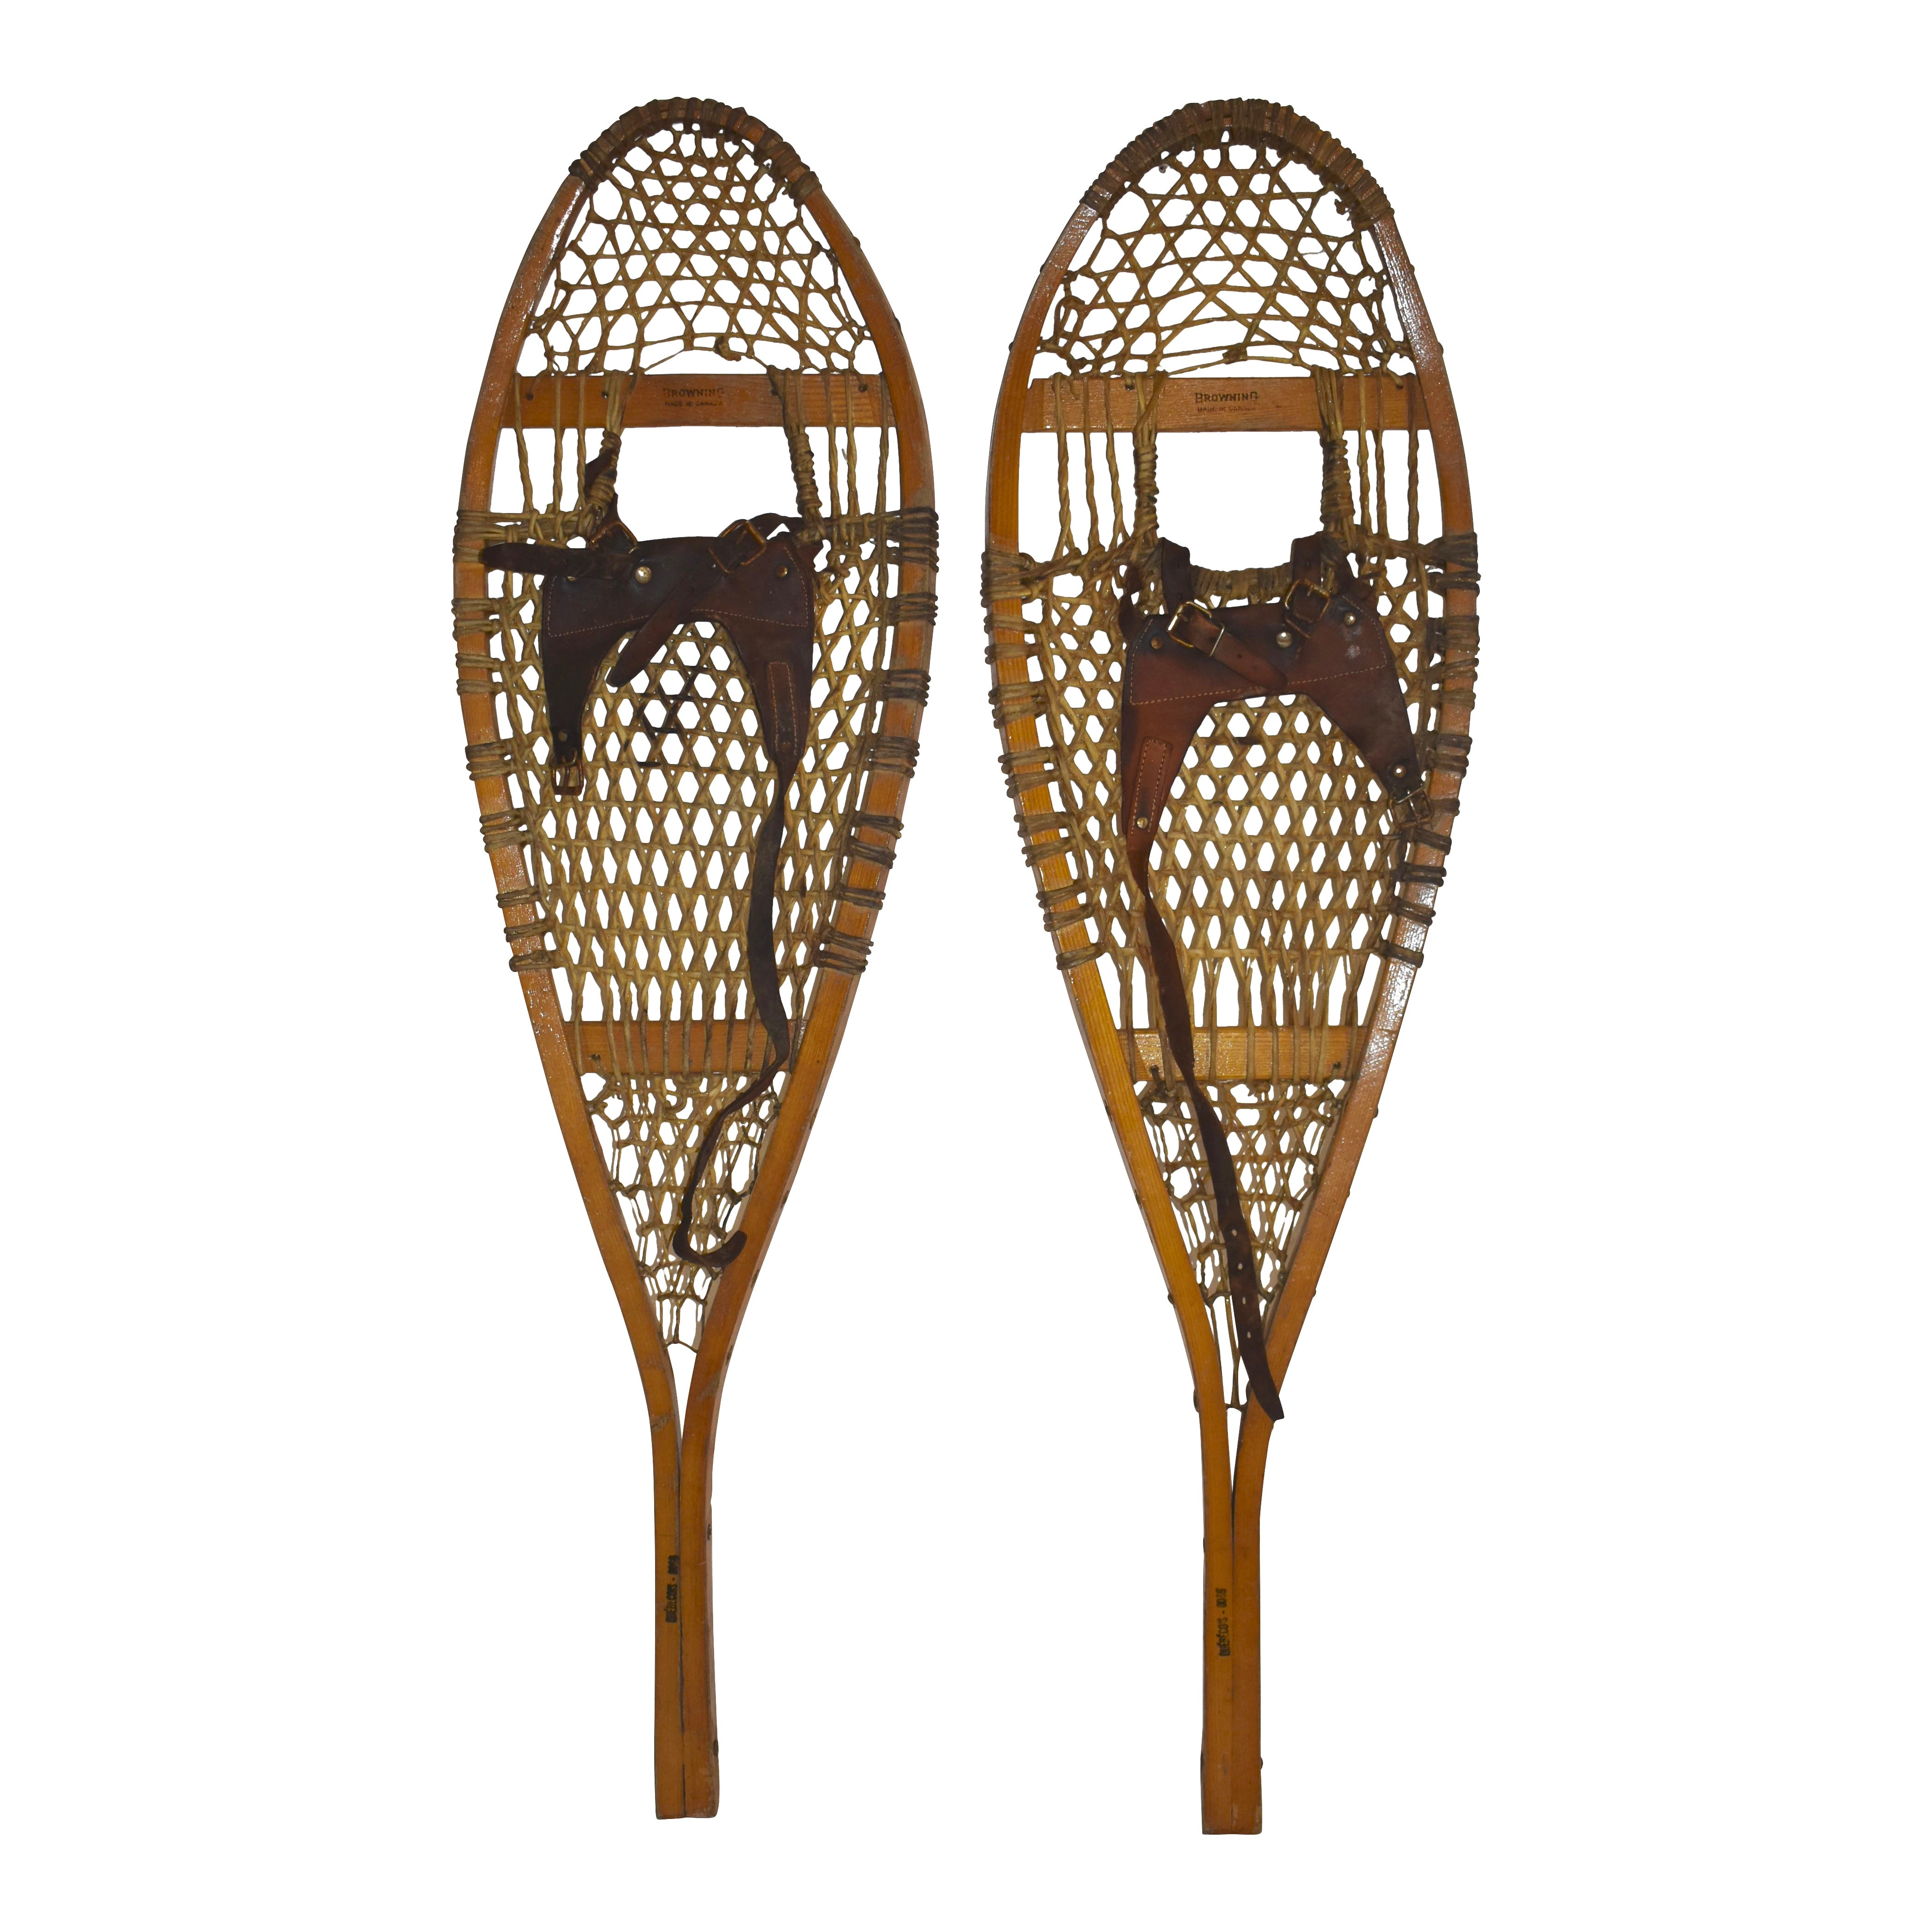 Canadian Huron Snowshoes by Browning